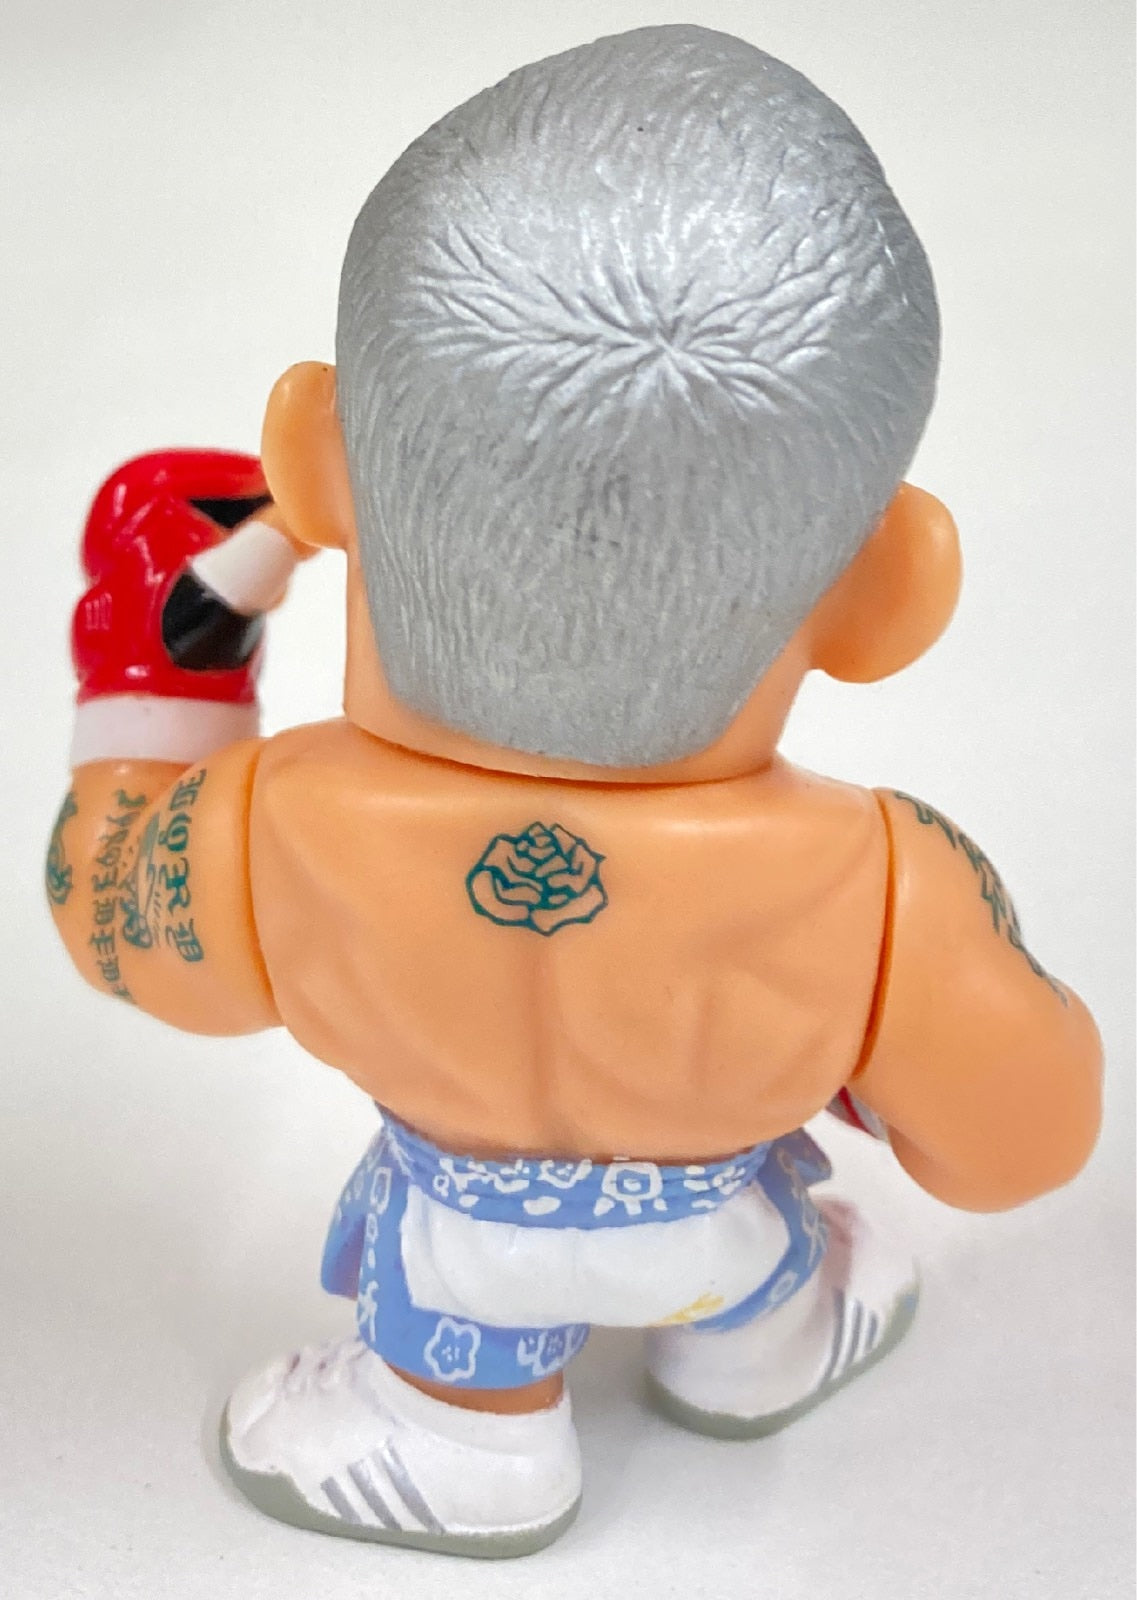 K-1 HAO Collection Ringside Minis Norifumi Yamamoto [With Silver Hair]